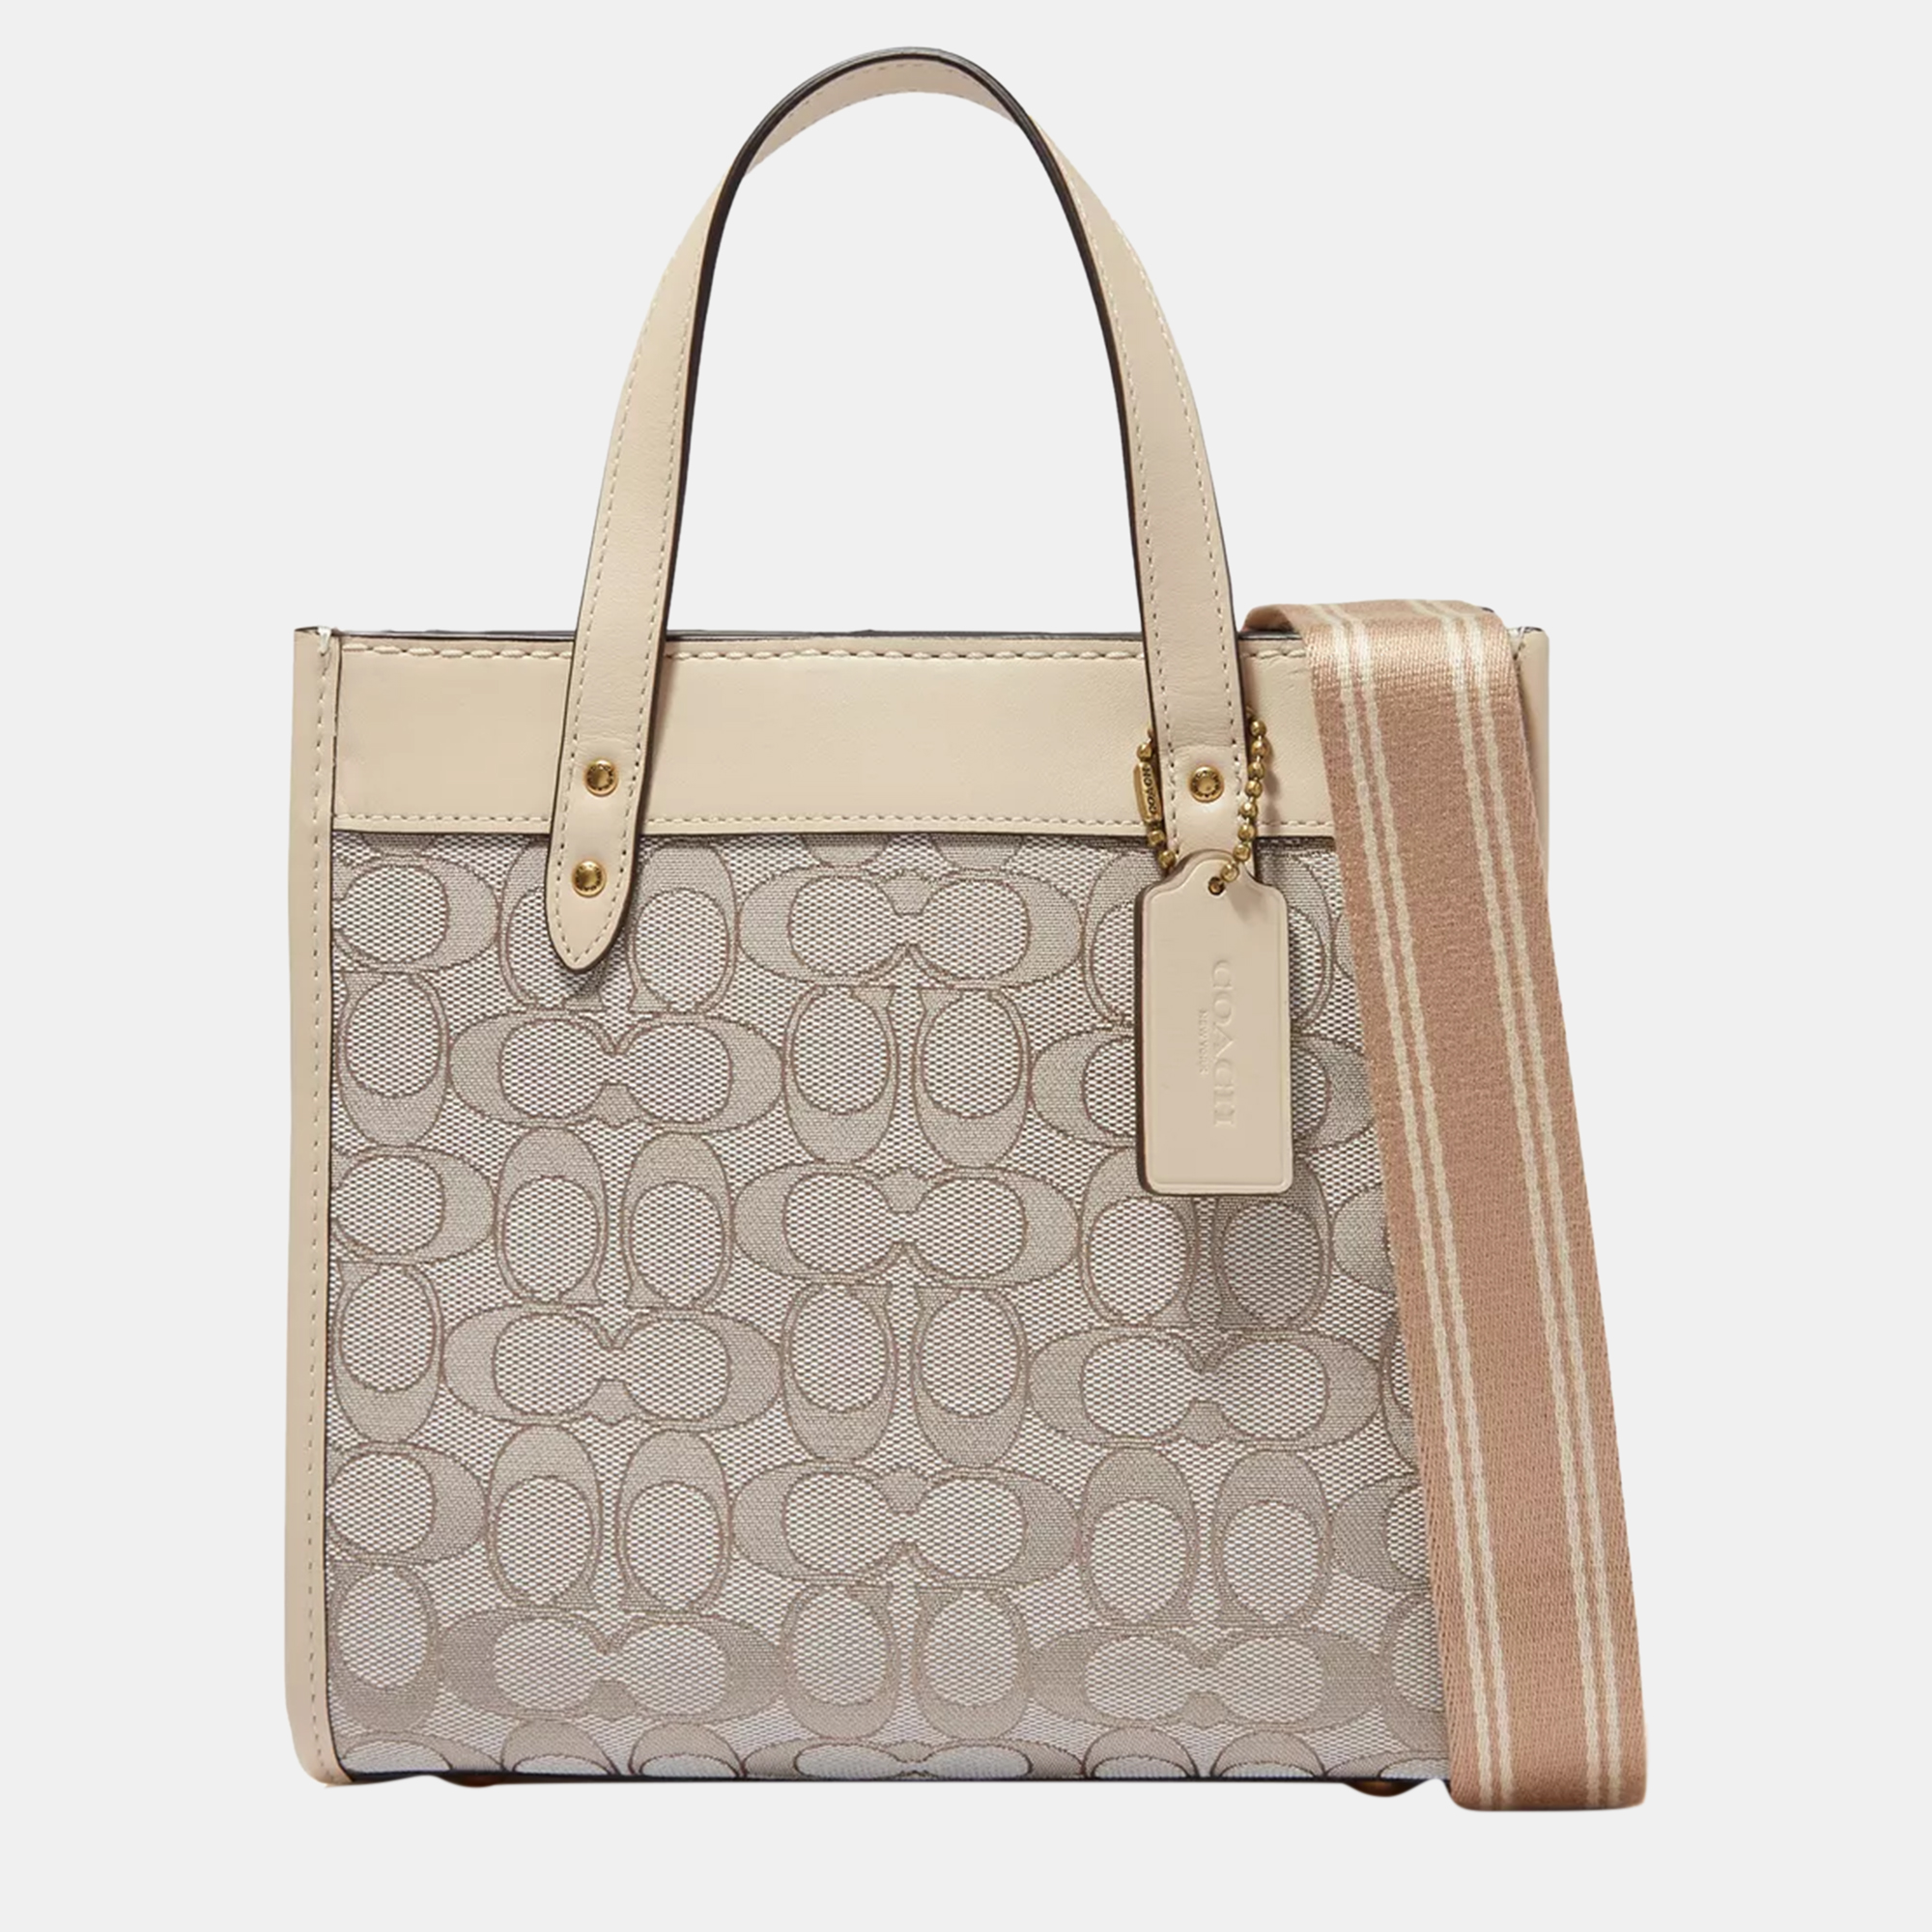 Elevate your every day with this Coach tote. Meticulously designed it seamlessly blends functionality with luxury offering the perfect accessory to showcase your discerning style while effortlessly carrying your essentials.